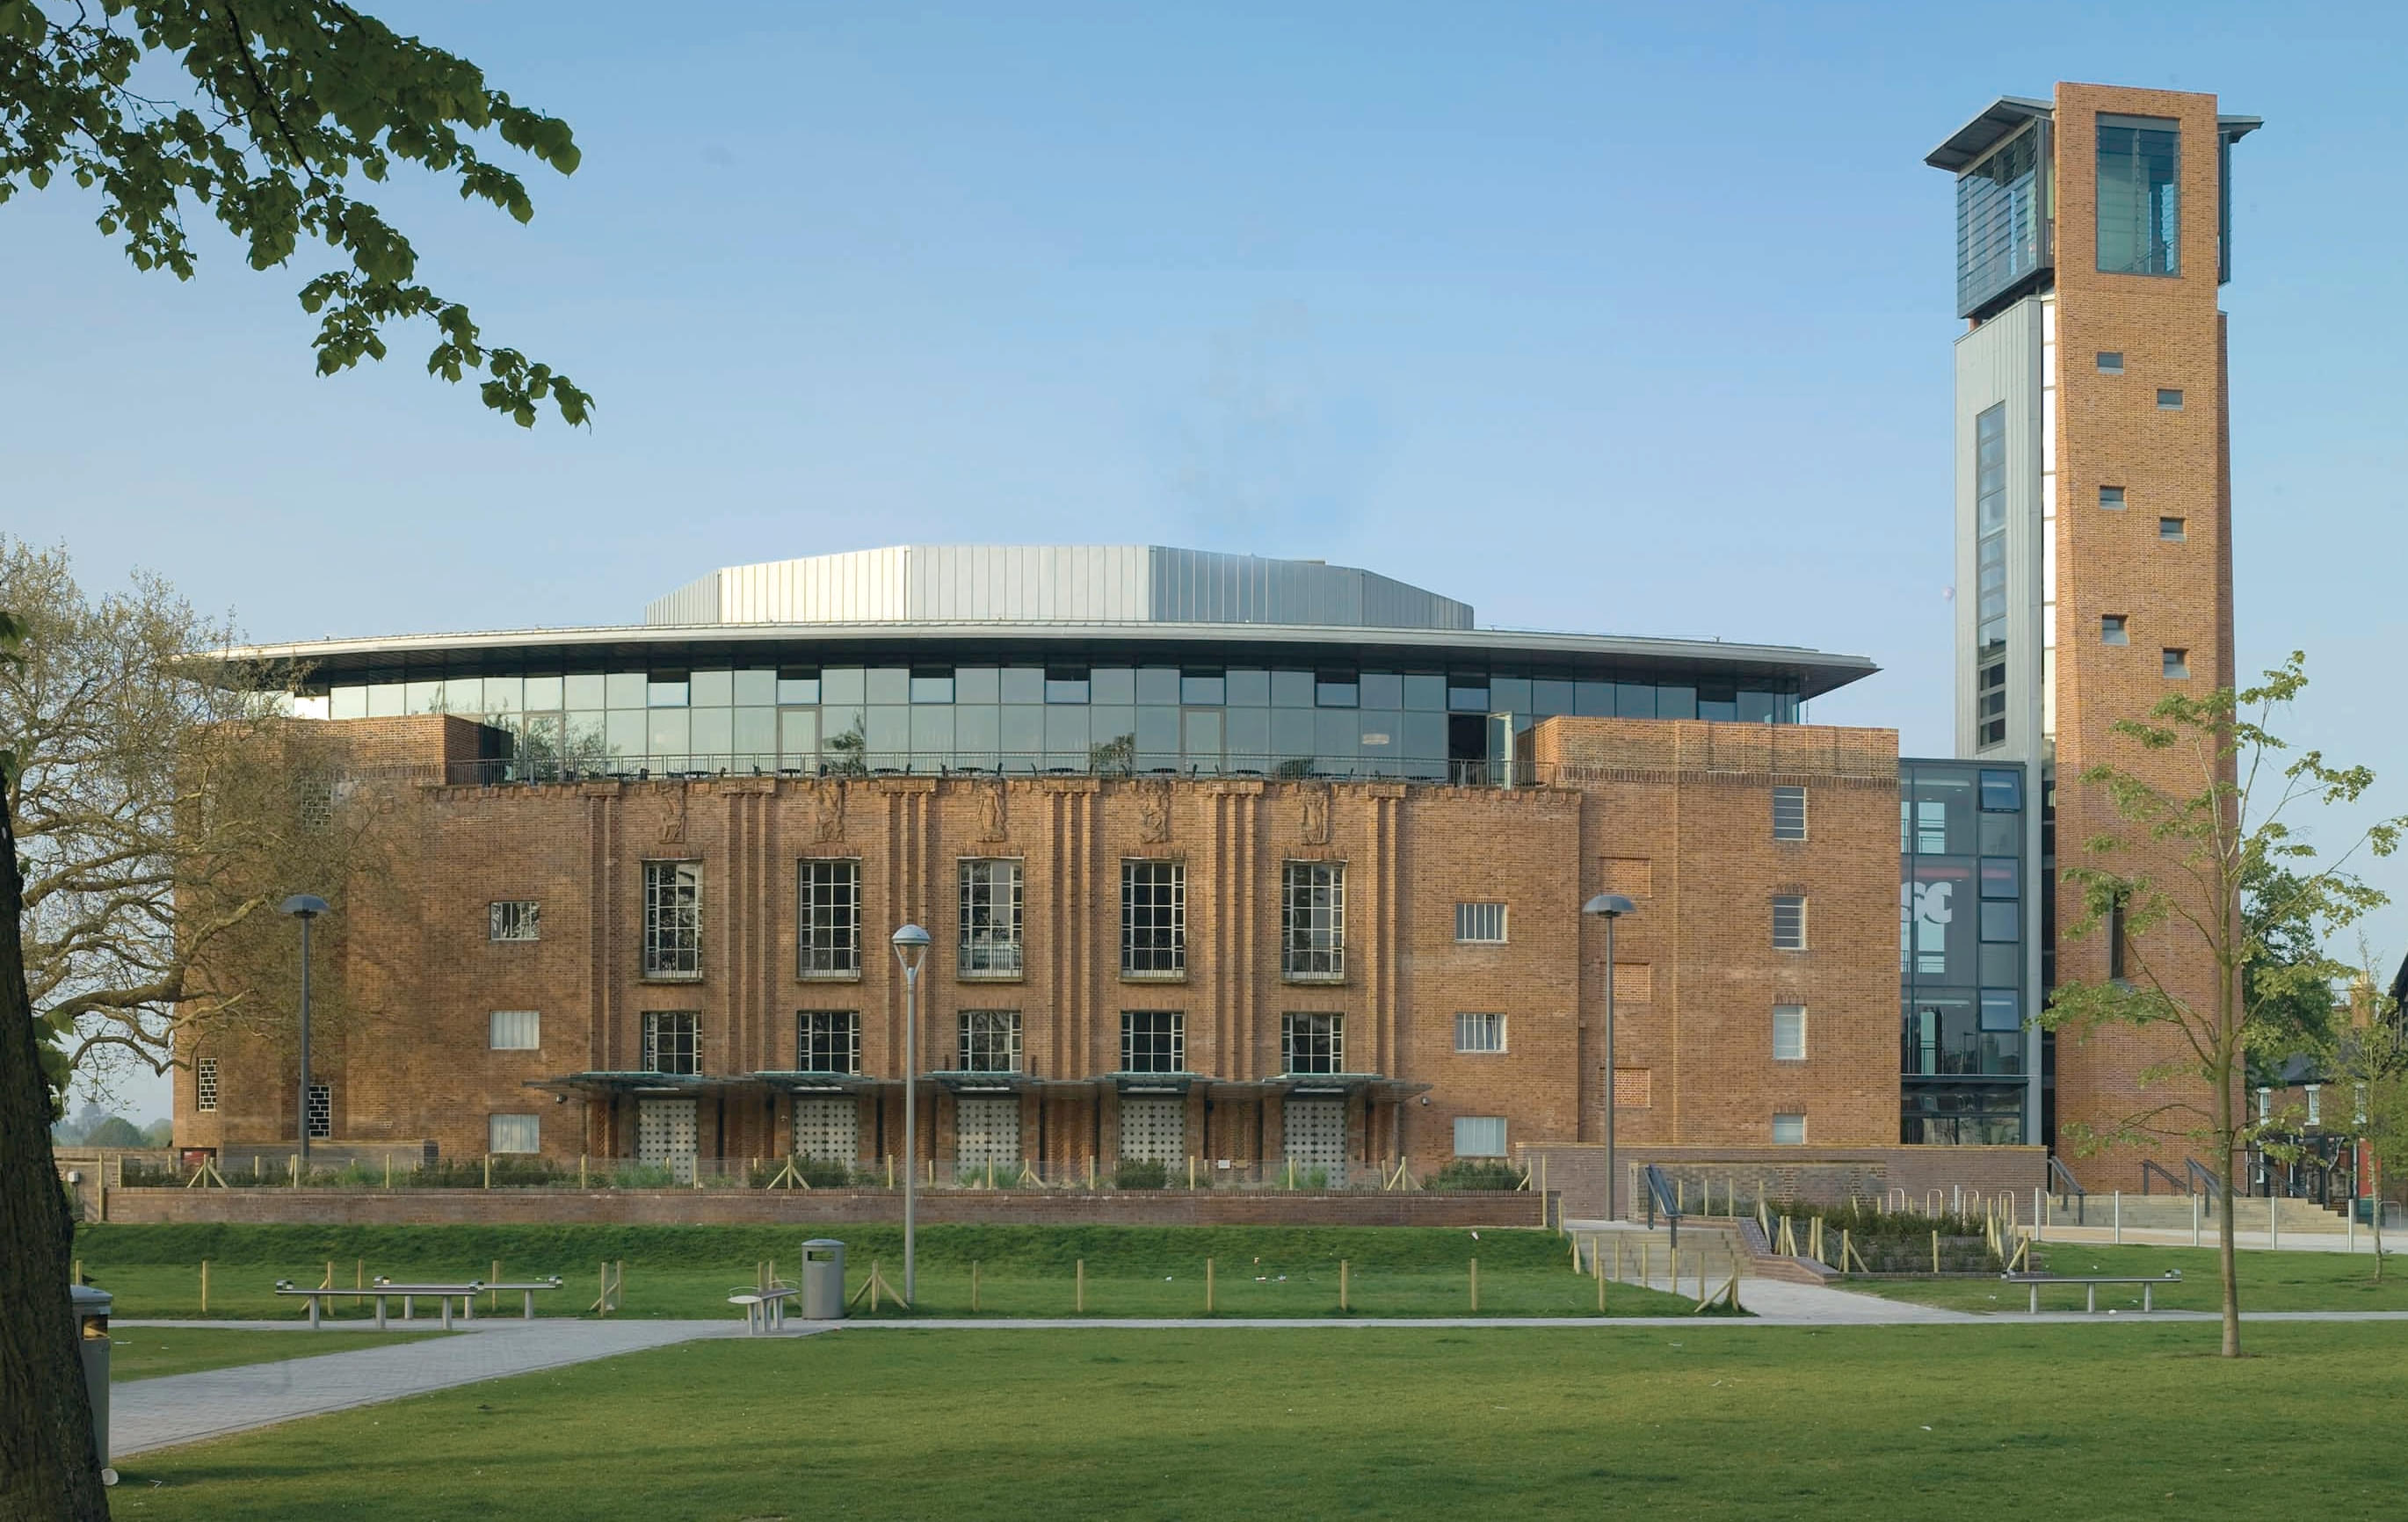 Royal Shakespeare Theatre Overview